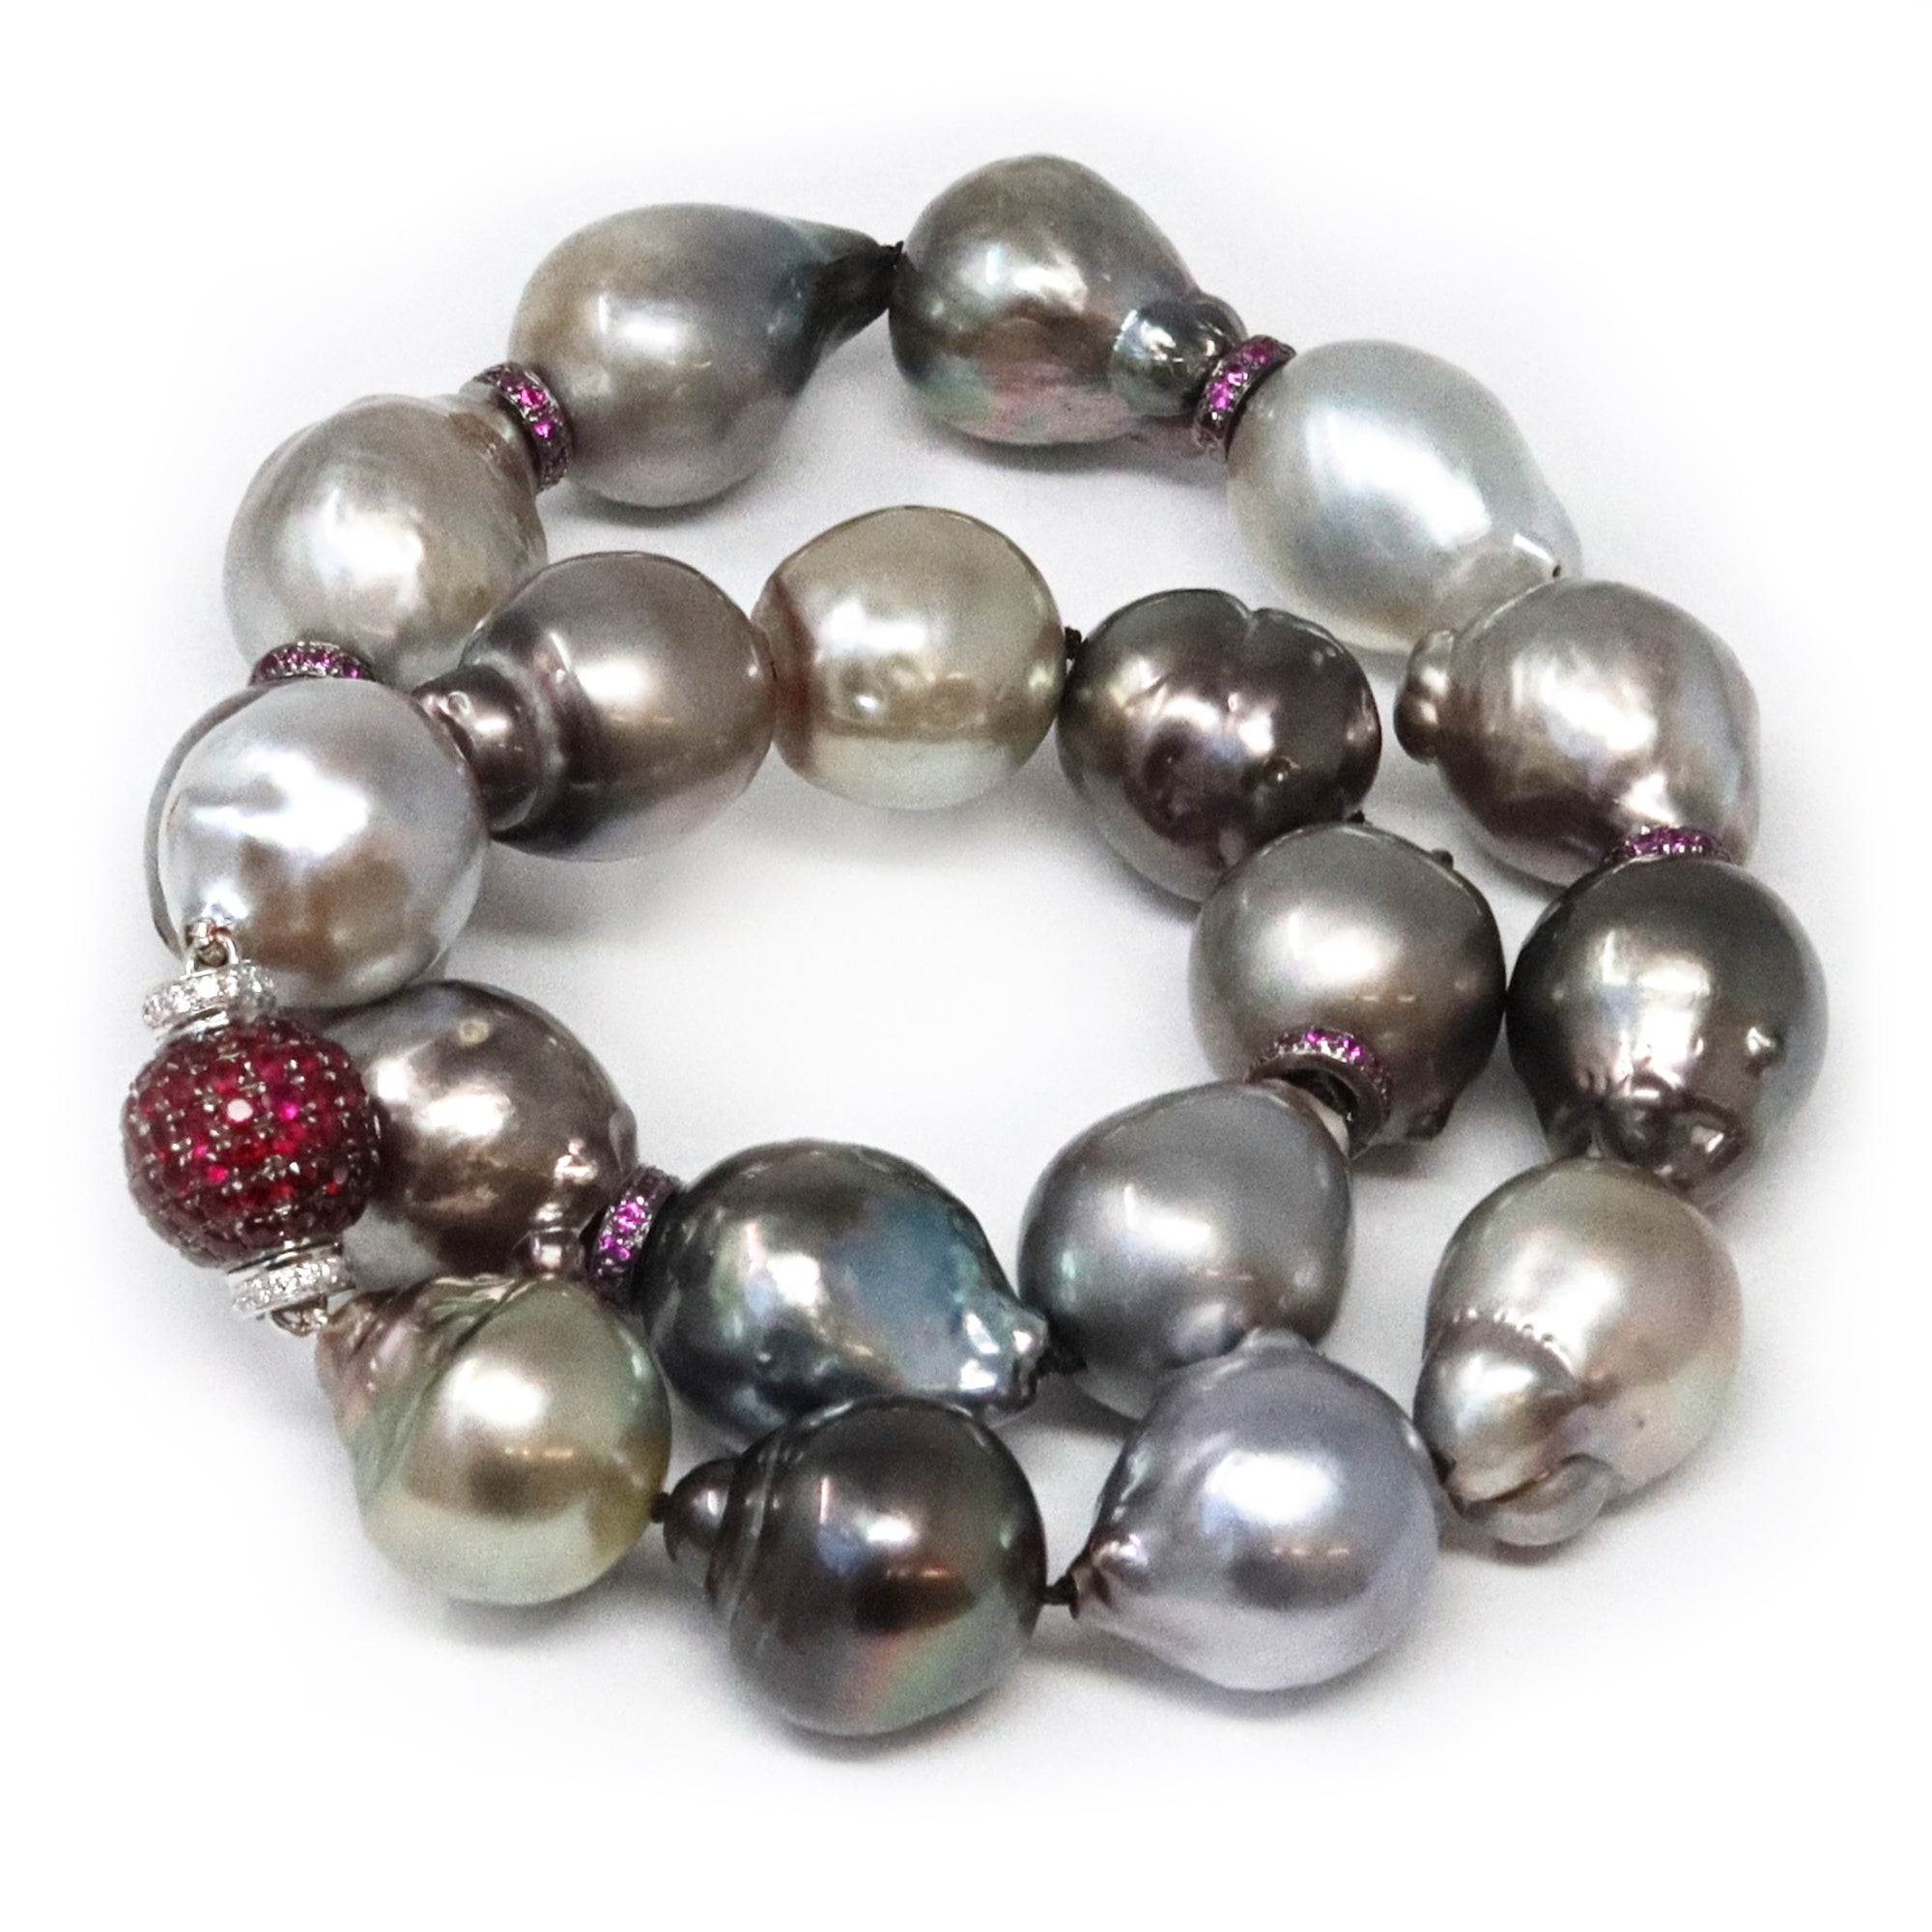 A striking and modern necklace featuring 19 Baroque AKA Free Form Tahitian pearls. The pearls are above average in size 14 to 17 millimeters. They display very good luster with a soft range of hues ranging from light pistachio to light grey. The